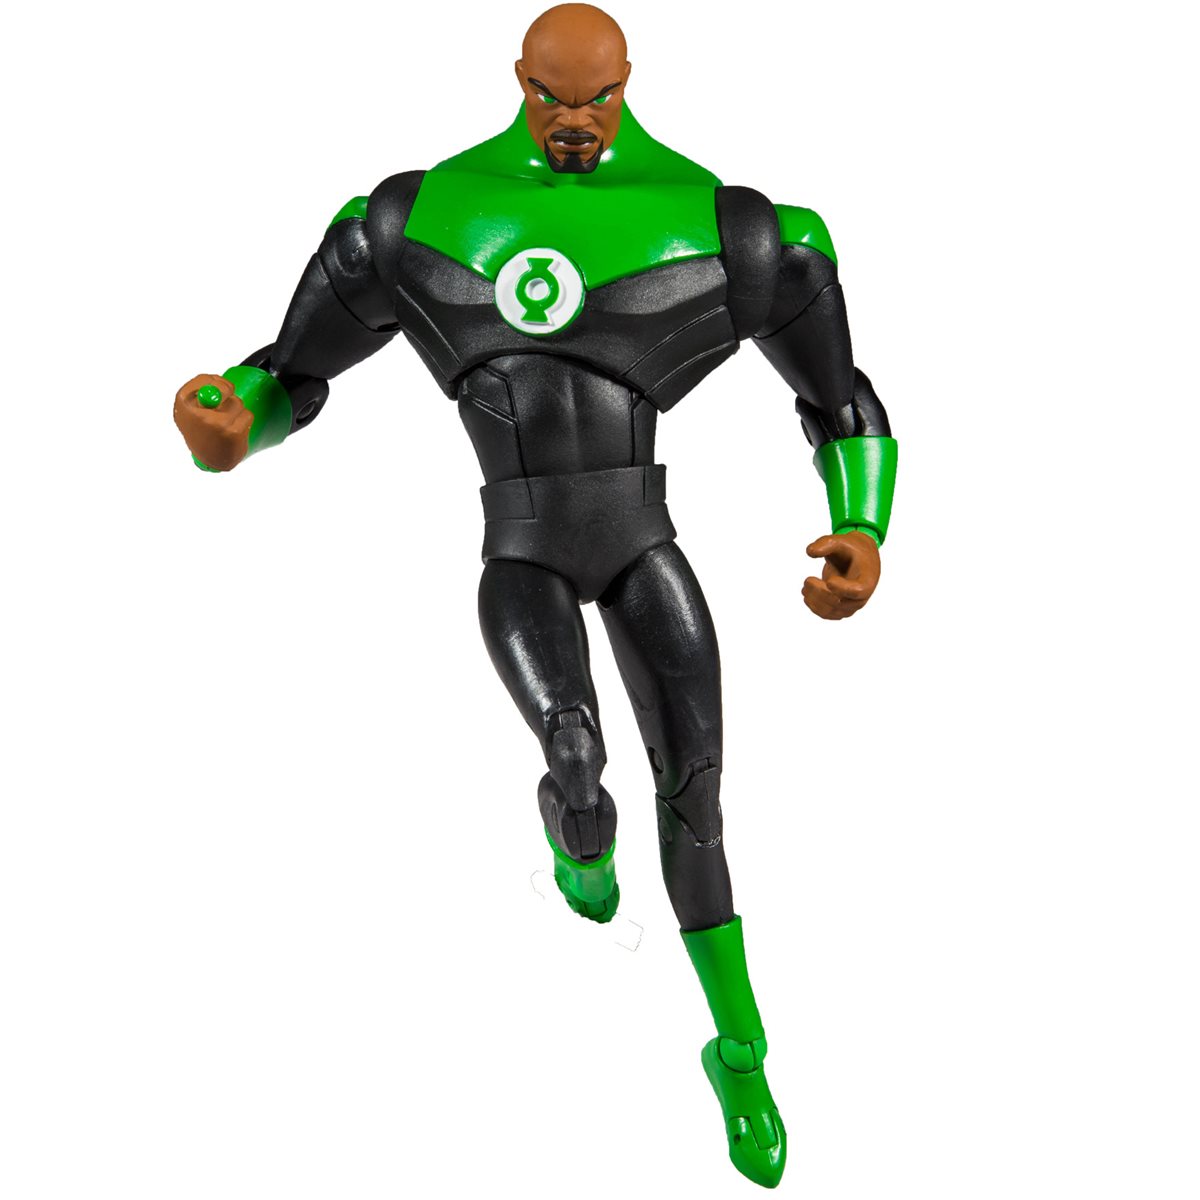 DC Animated Wave 1 7-Inch Action Figure Set